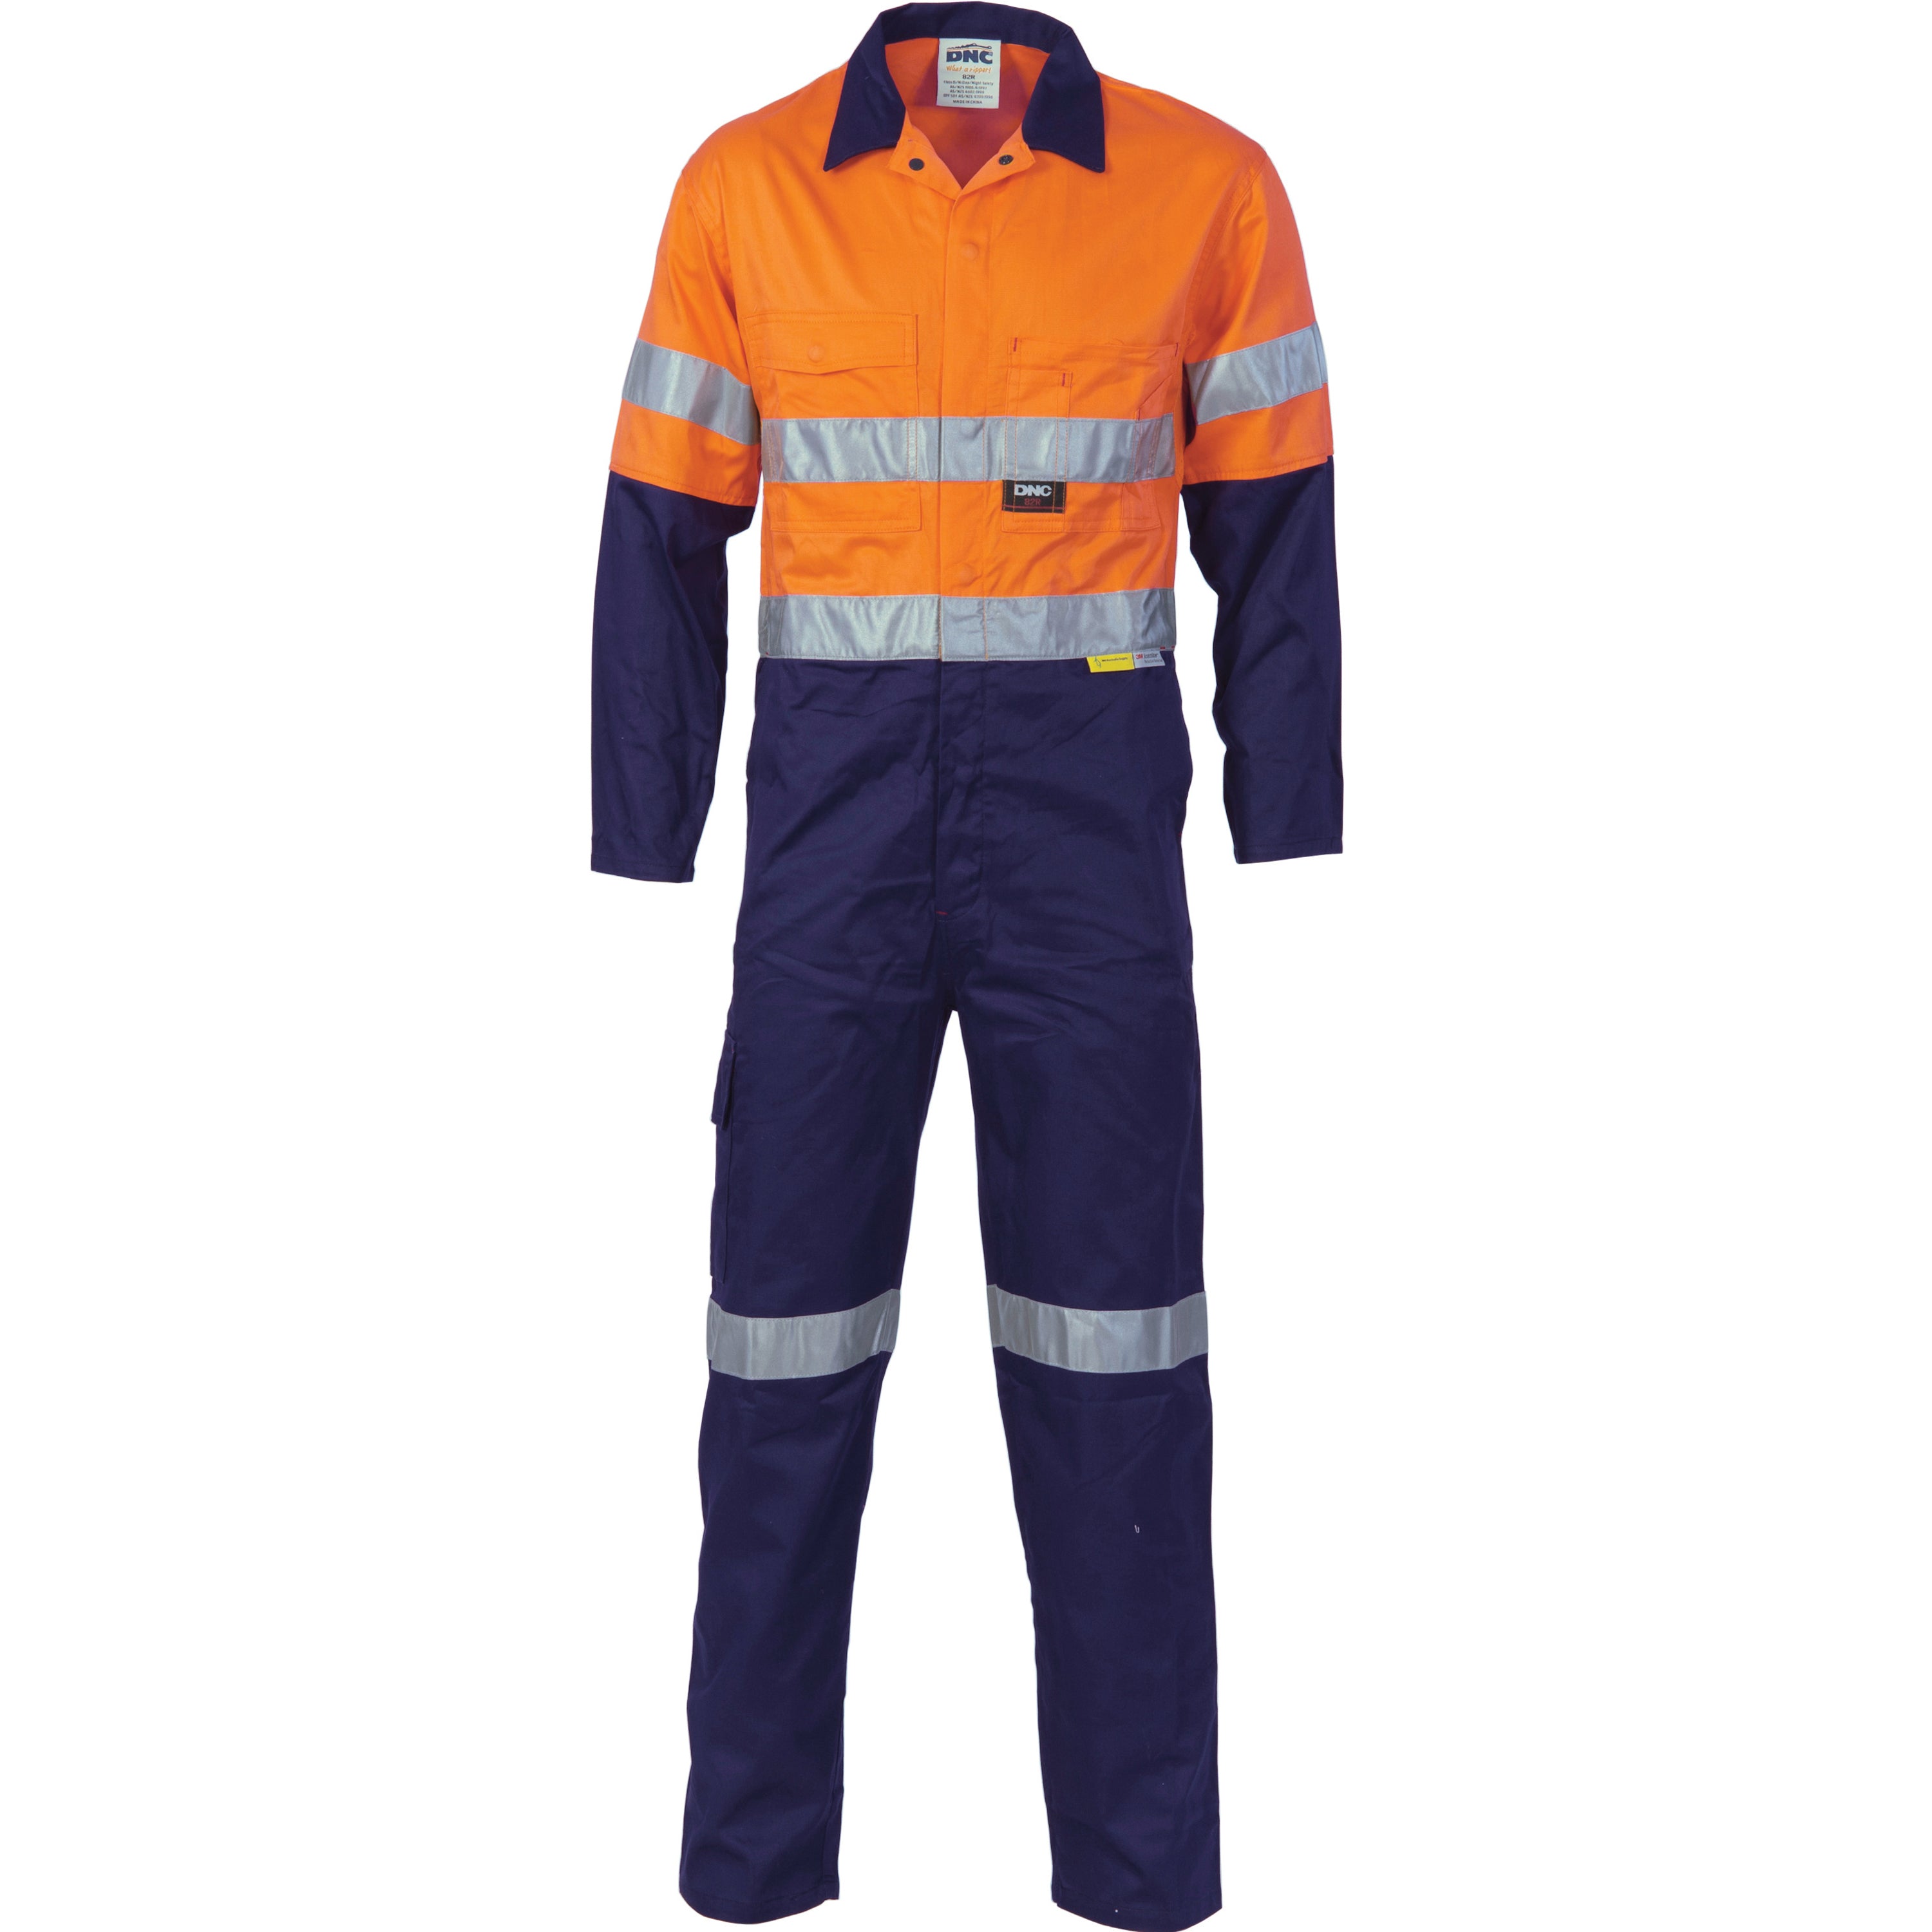 DNC 3955 Hi-vis Cool breeze Two Tone Lightweight Cotton Coverall With 3m Tape